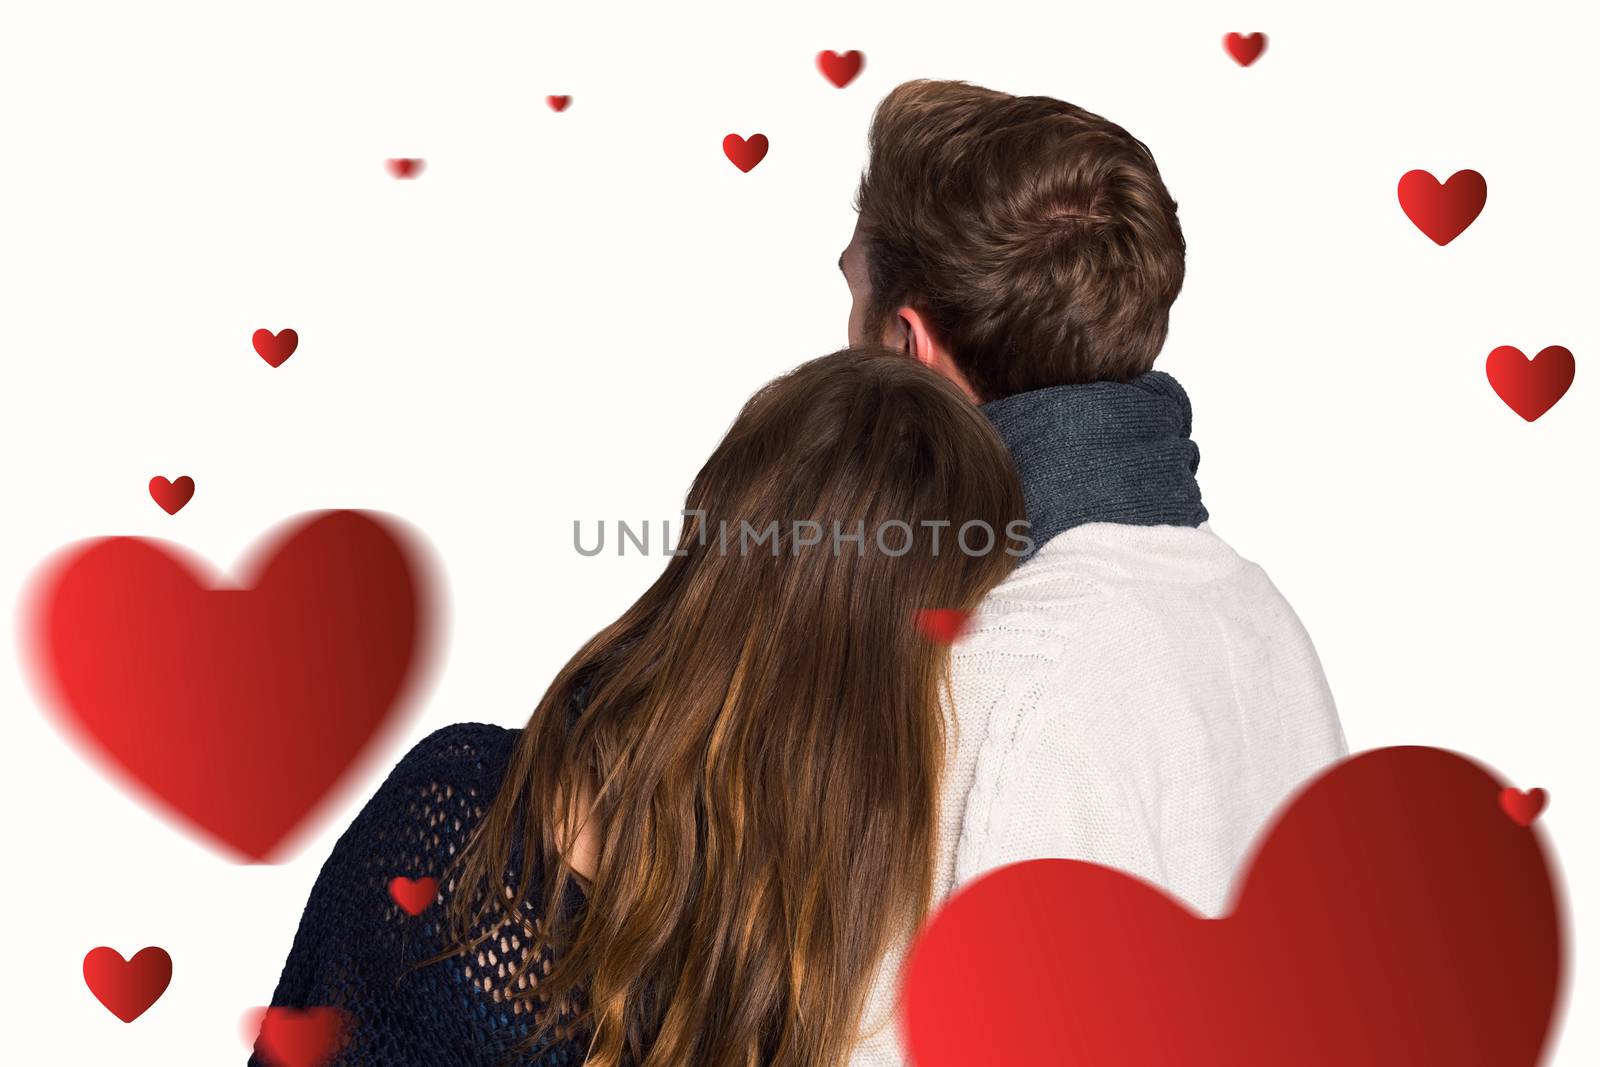 Composite image of close up rear view of romantic couple by Wavebreakmedia